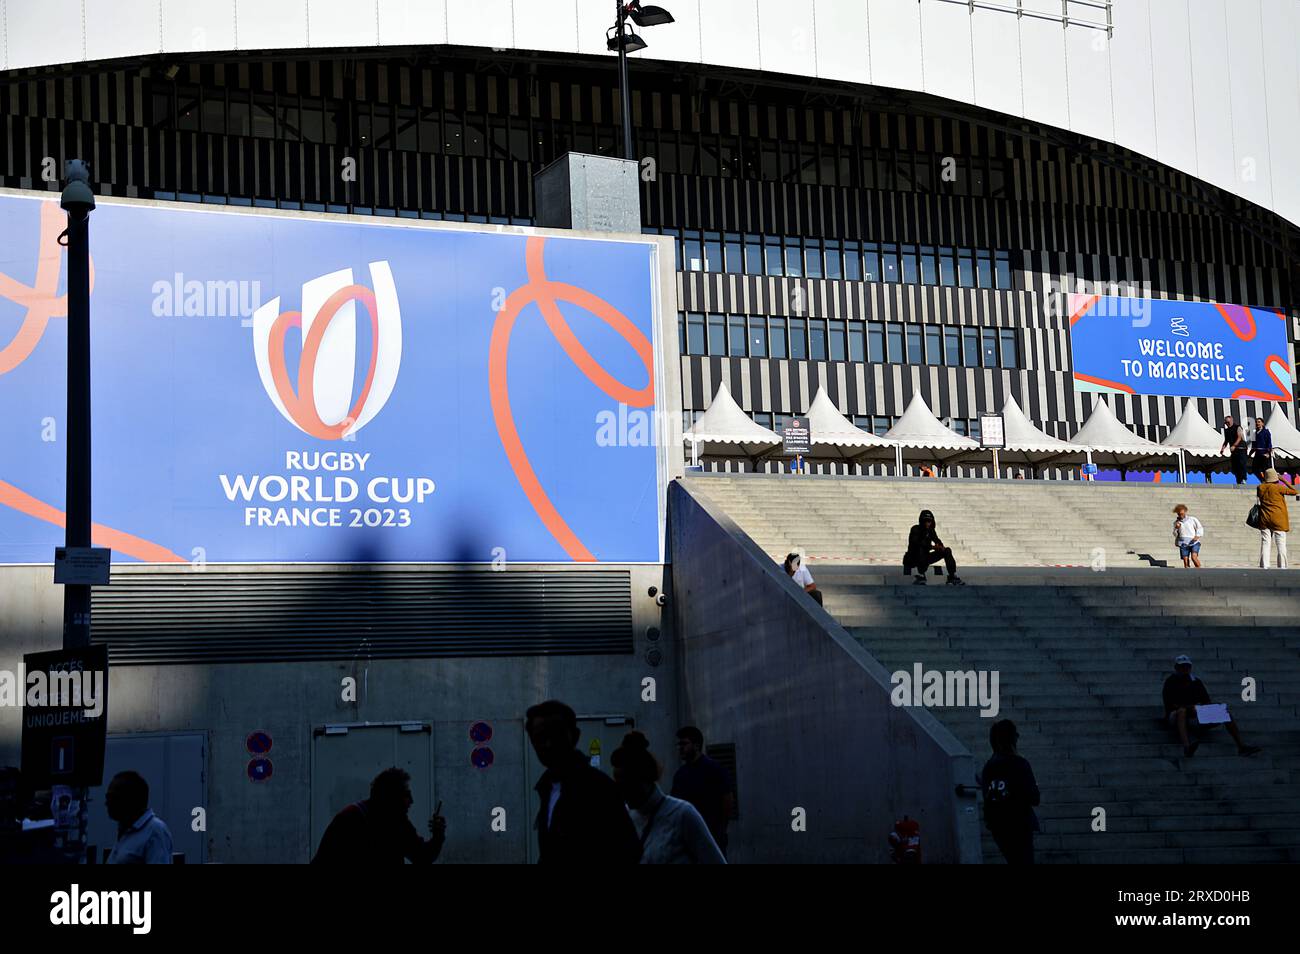 People and Rugby World Cup posters are seen at the entrance to the Orange-Velodrome Stadium. France hosts the 2023 Rugby World Cup from September 8 to October 28, 2023. The South Africa - Tonga match will take place at the Orange-Vélodrome stadium in Marseille on October 1, 2023. Stock Photo